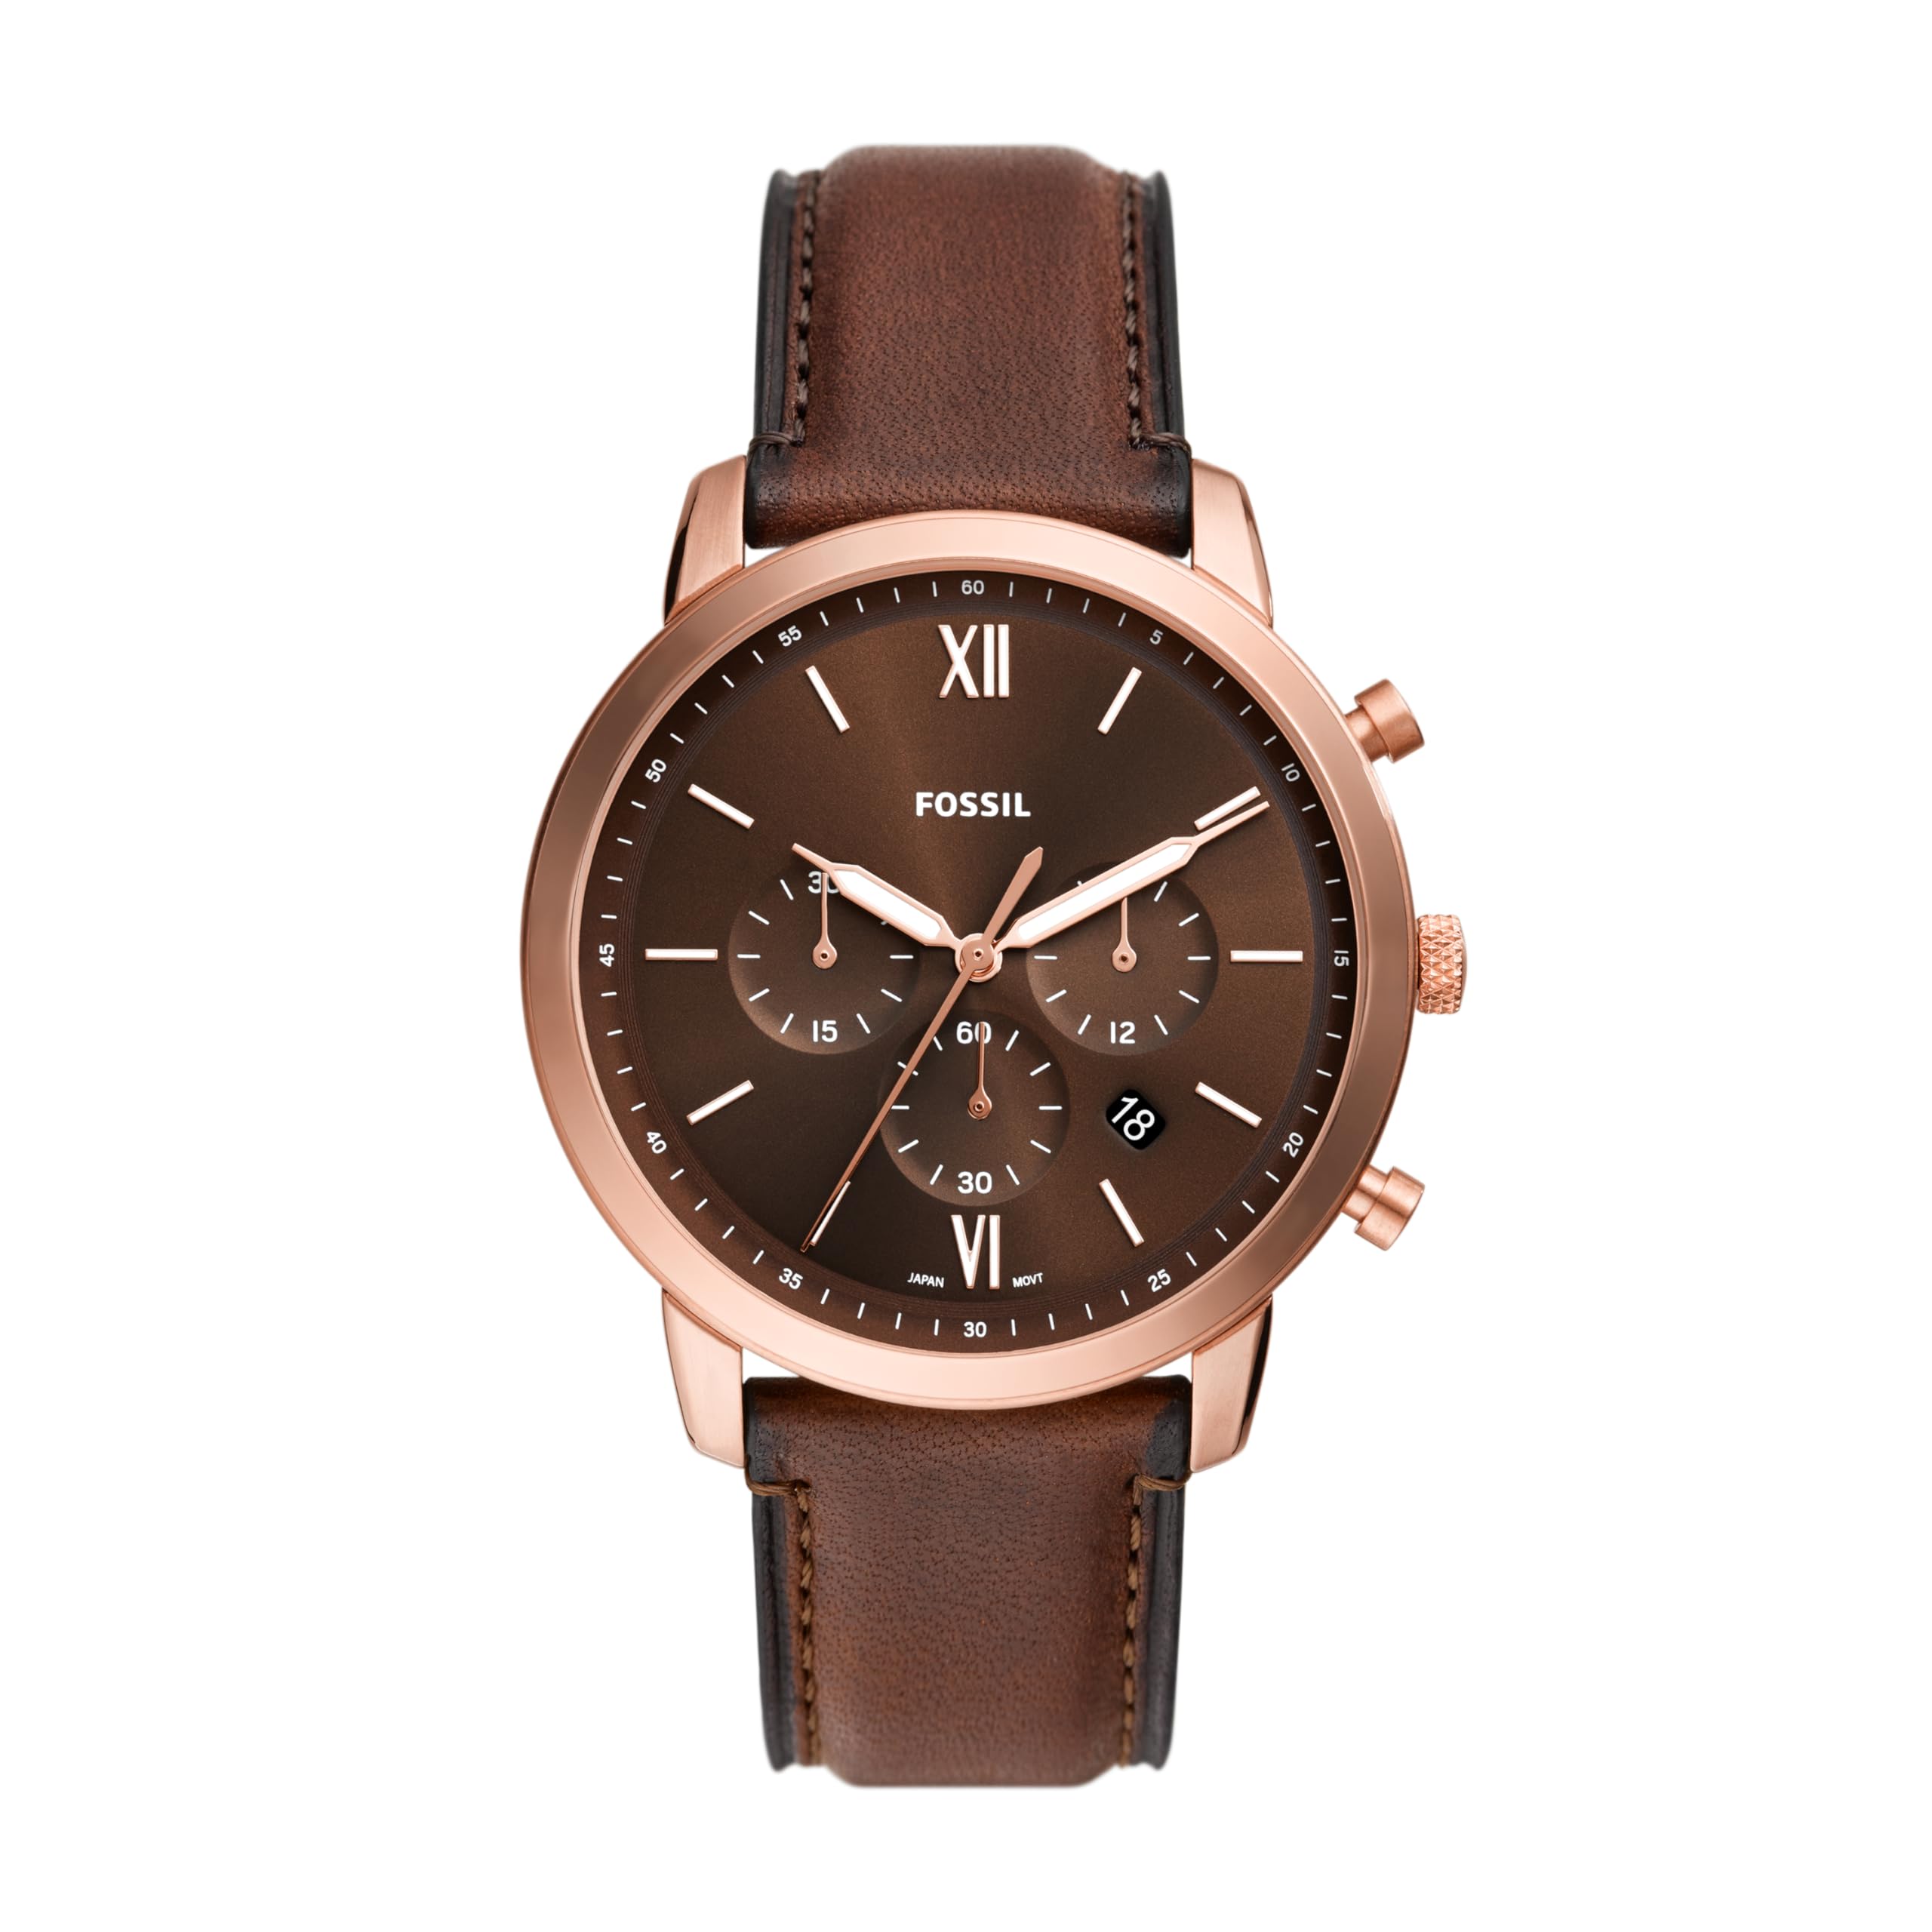 Fossil Men's Neutra Quartz Stainless Steel Chronograph Watch, Color: Rose Gold/Chocolate (Model: FS6026)